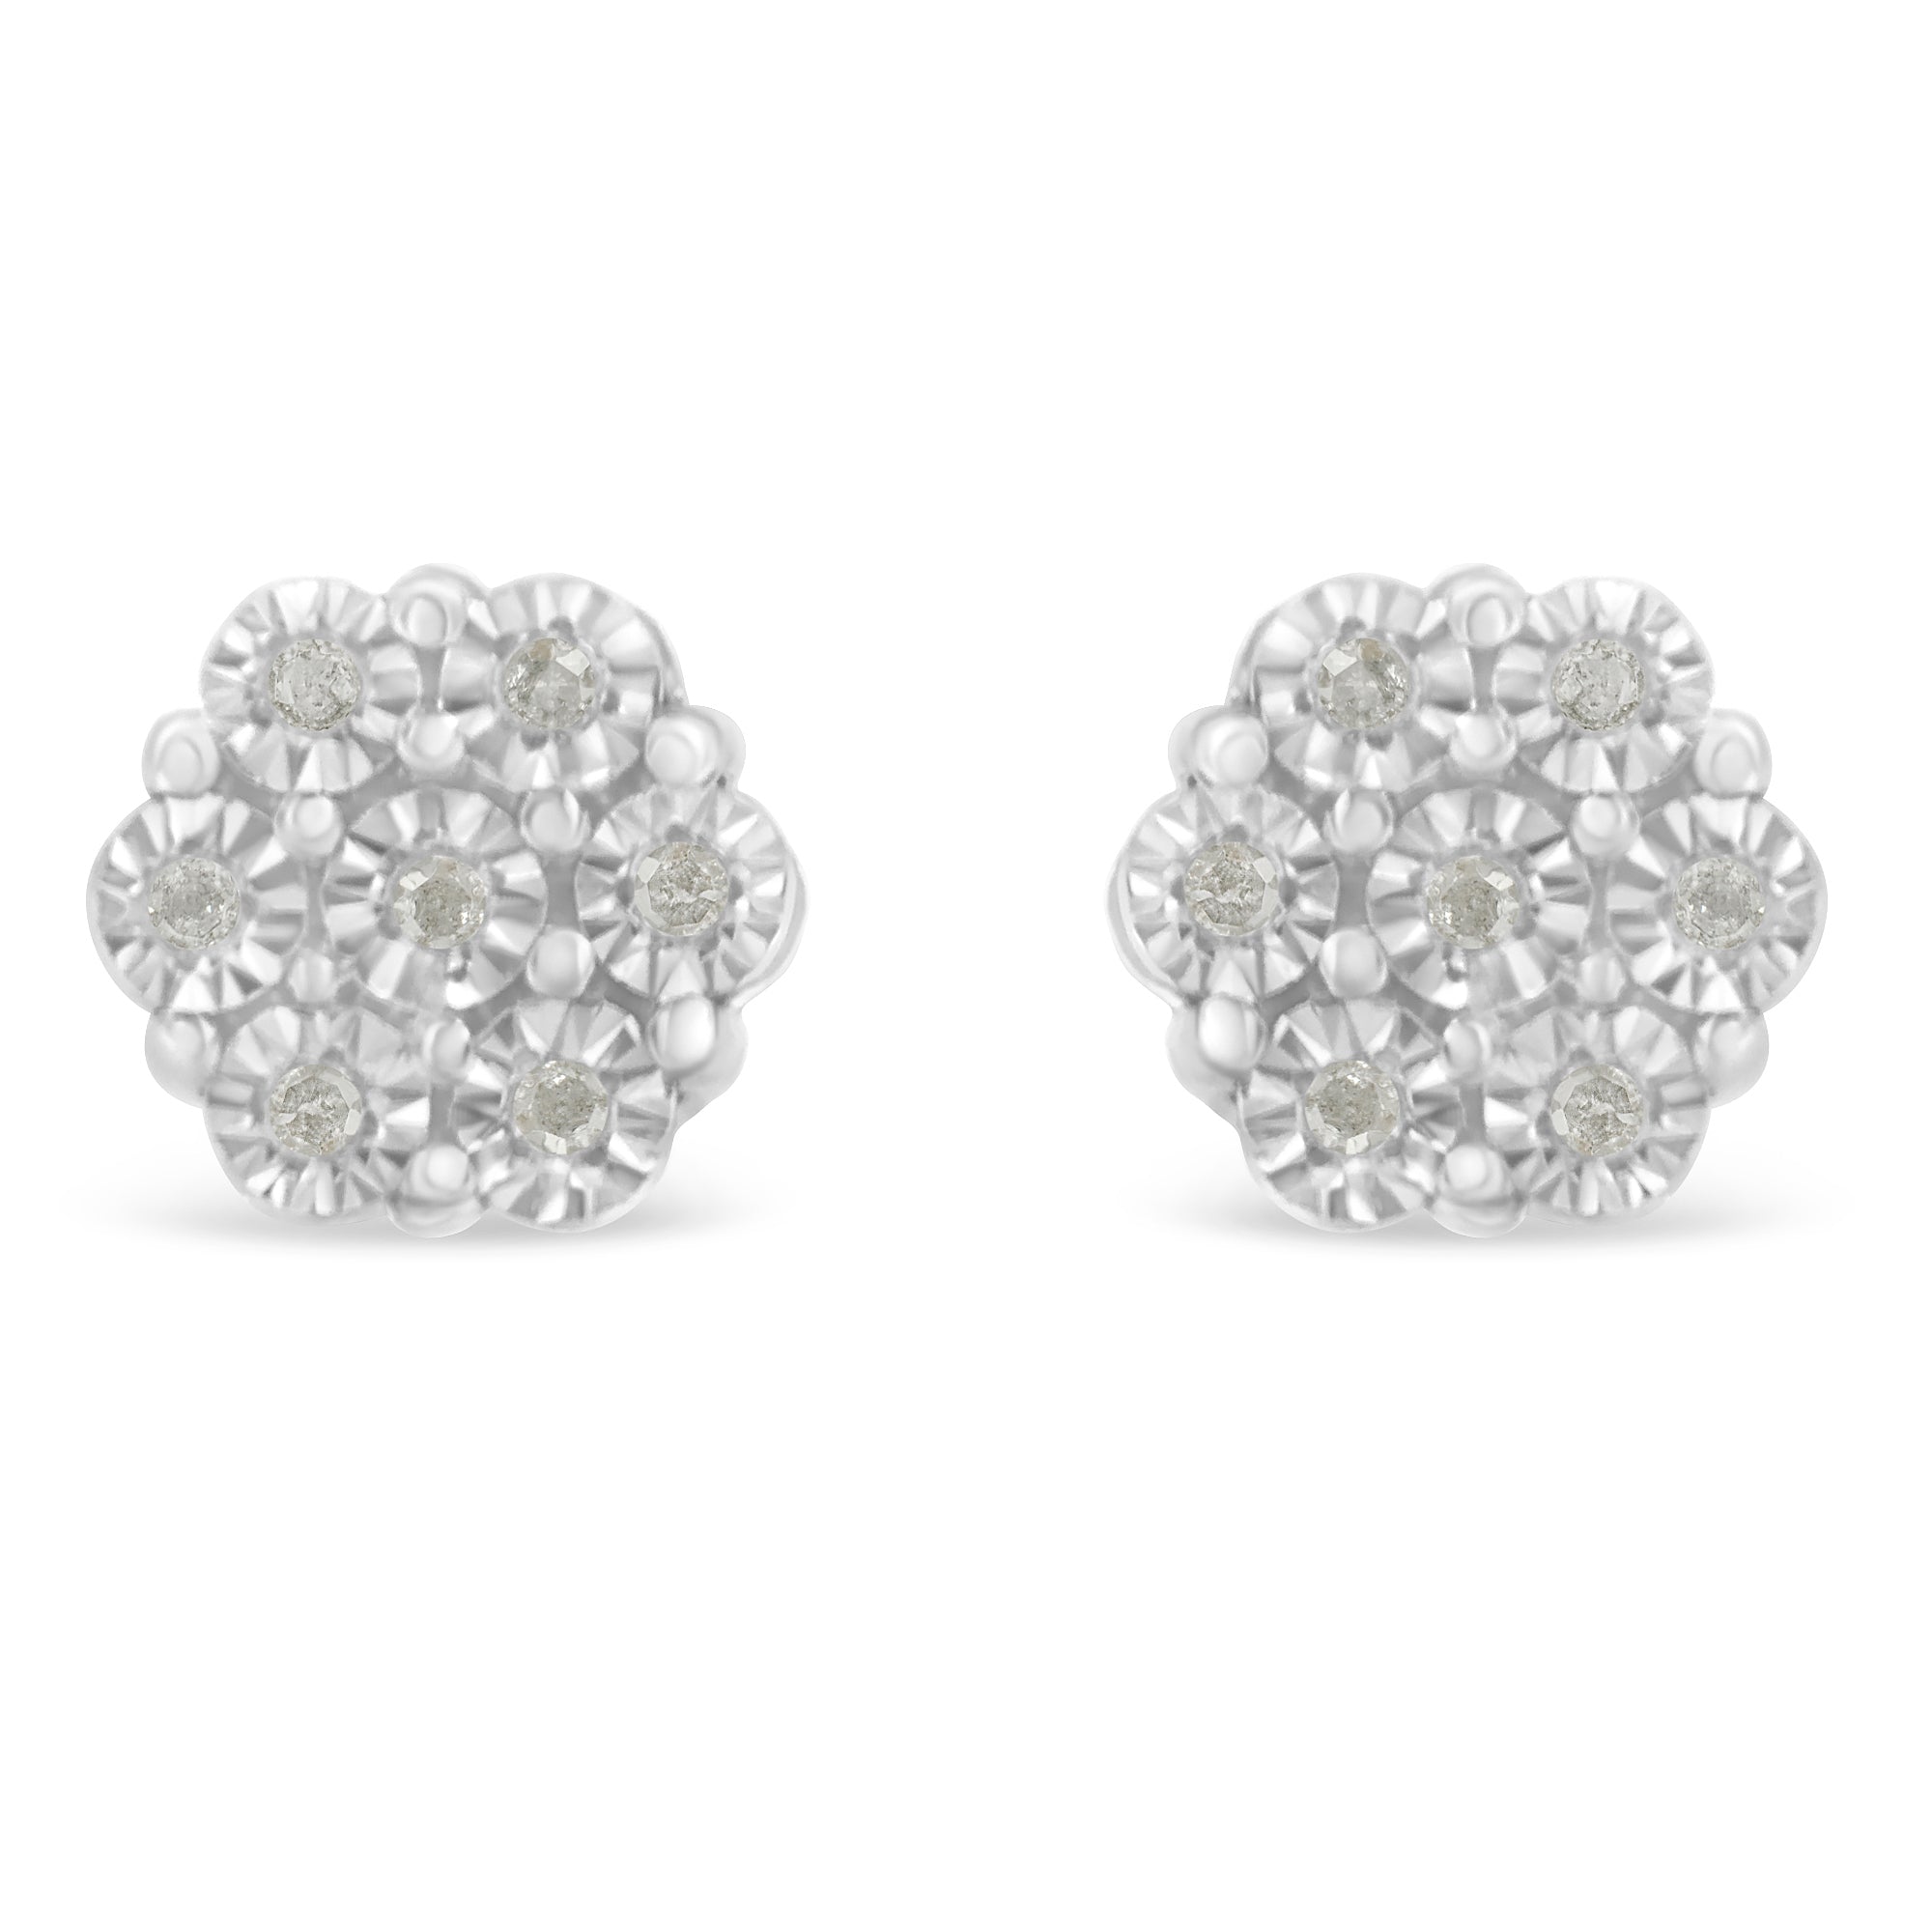 .925 Sterling Silver 1/10 Cttw Round-Cut Diamond Miracle-Set Floral Cluster Button Stud Earrings (I-J Color, I2-I3 Clarity) - LinkagejewelrydesignLinkagejewelrydesign